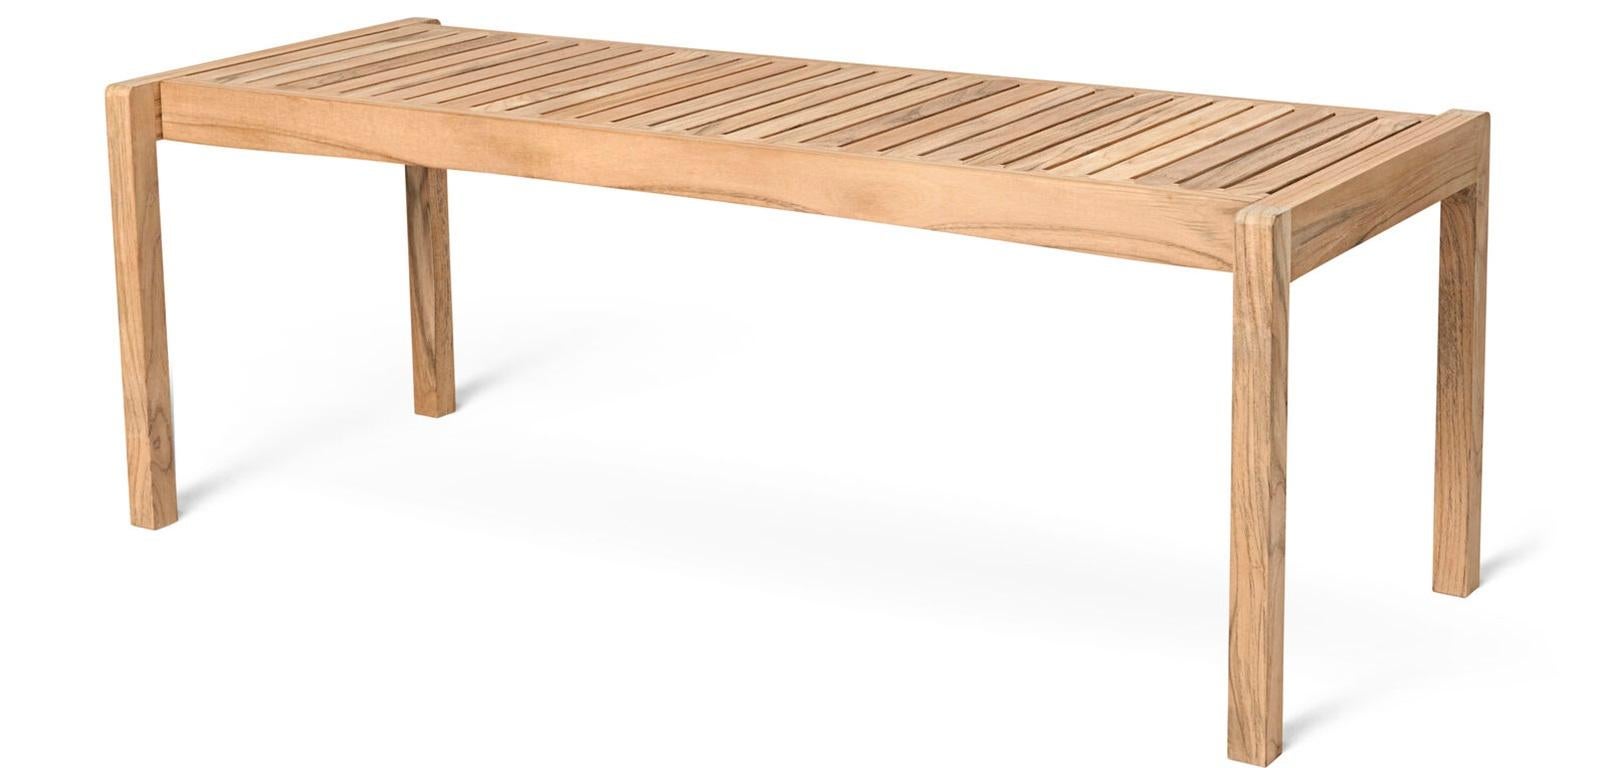 Alfred Homann designed the AH912 Outdoor Table Bench in 2022 as part of the AH Outdoor series. Like the rest of the series, the bench is characterized by strict lines elegantly combined with soft, rounded details. The bench is made of FSC-certified